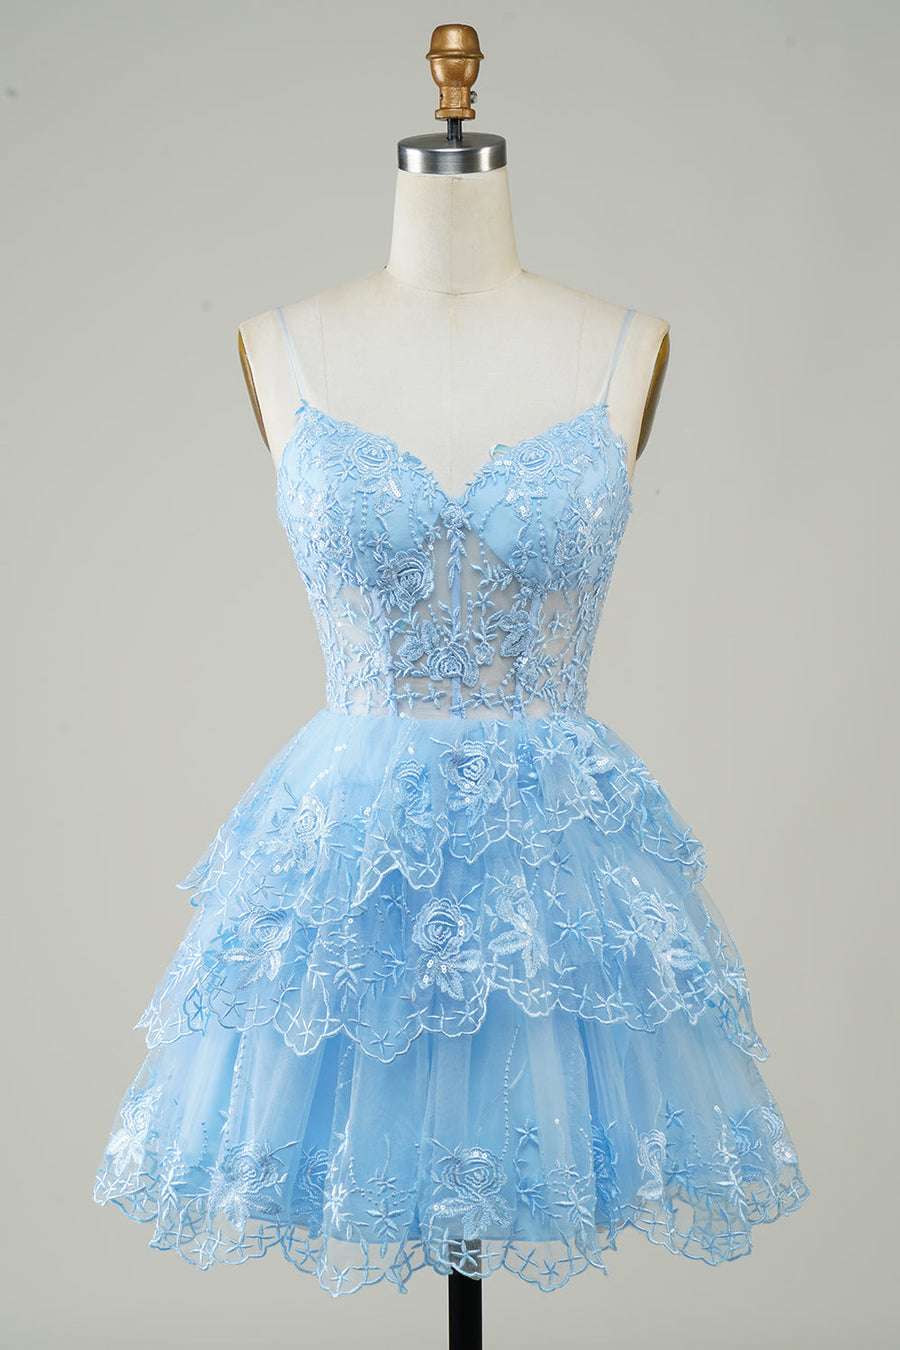 Glitter Lace Corset Ruffle Tiered Short Homecoming Dress in light blue